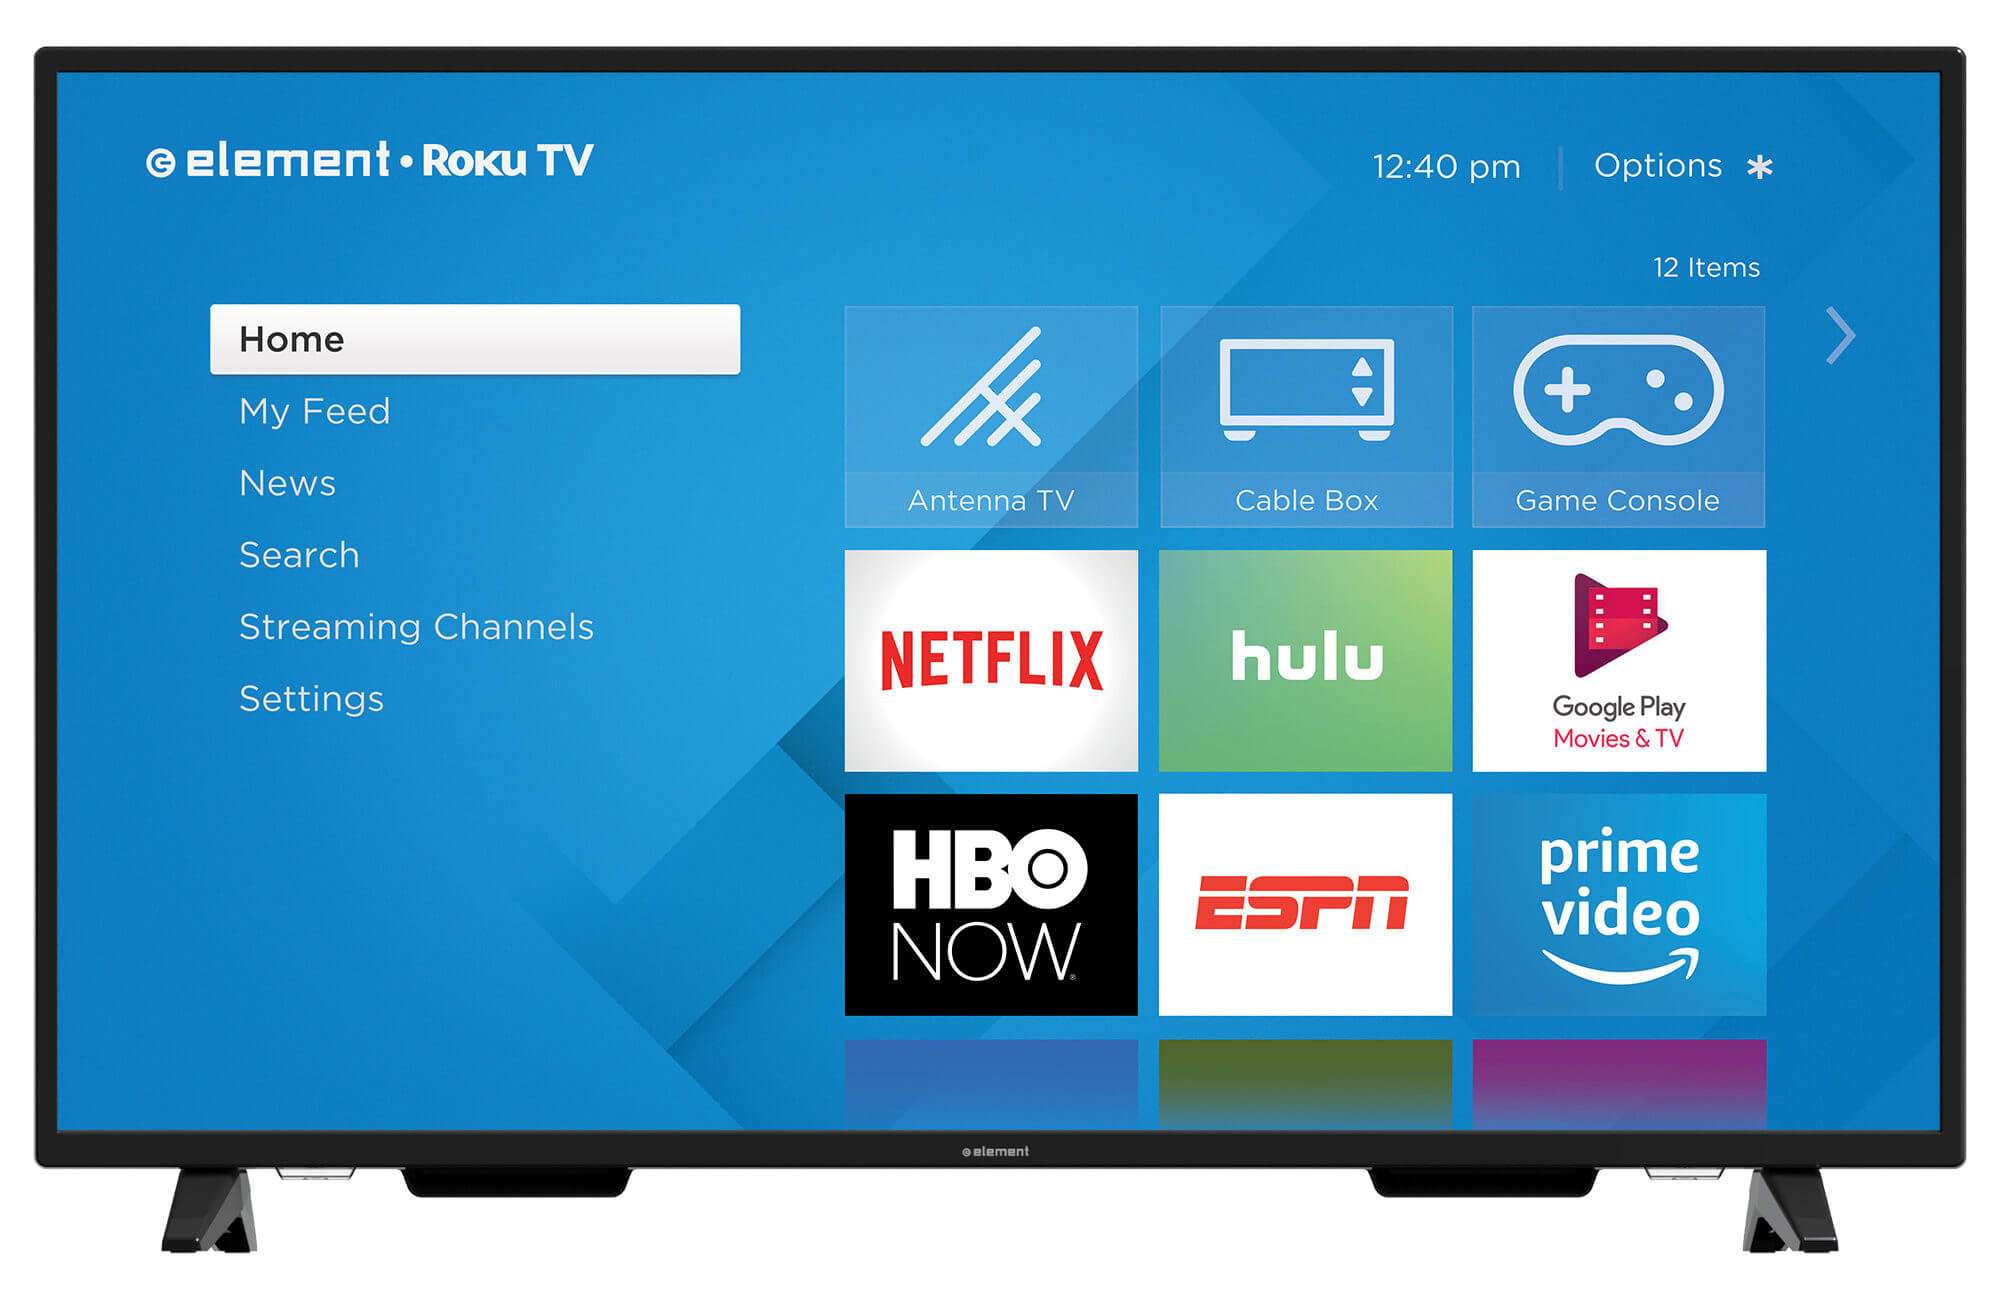 How Do I Download Hulu App On My Smart TV